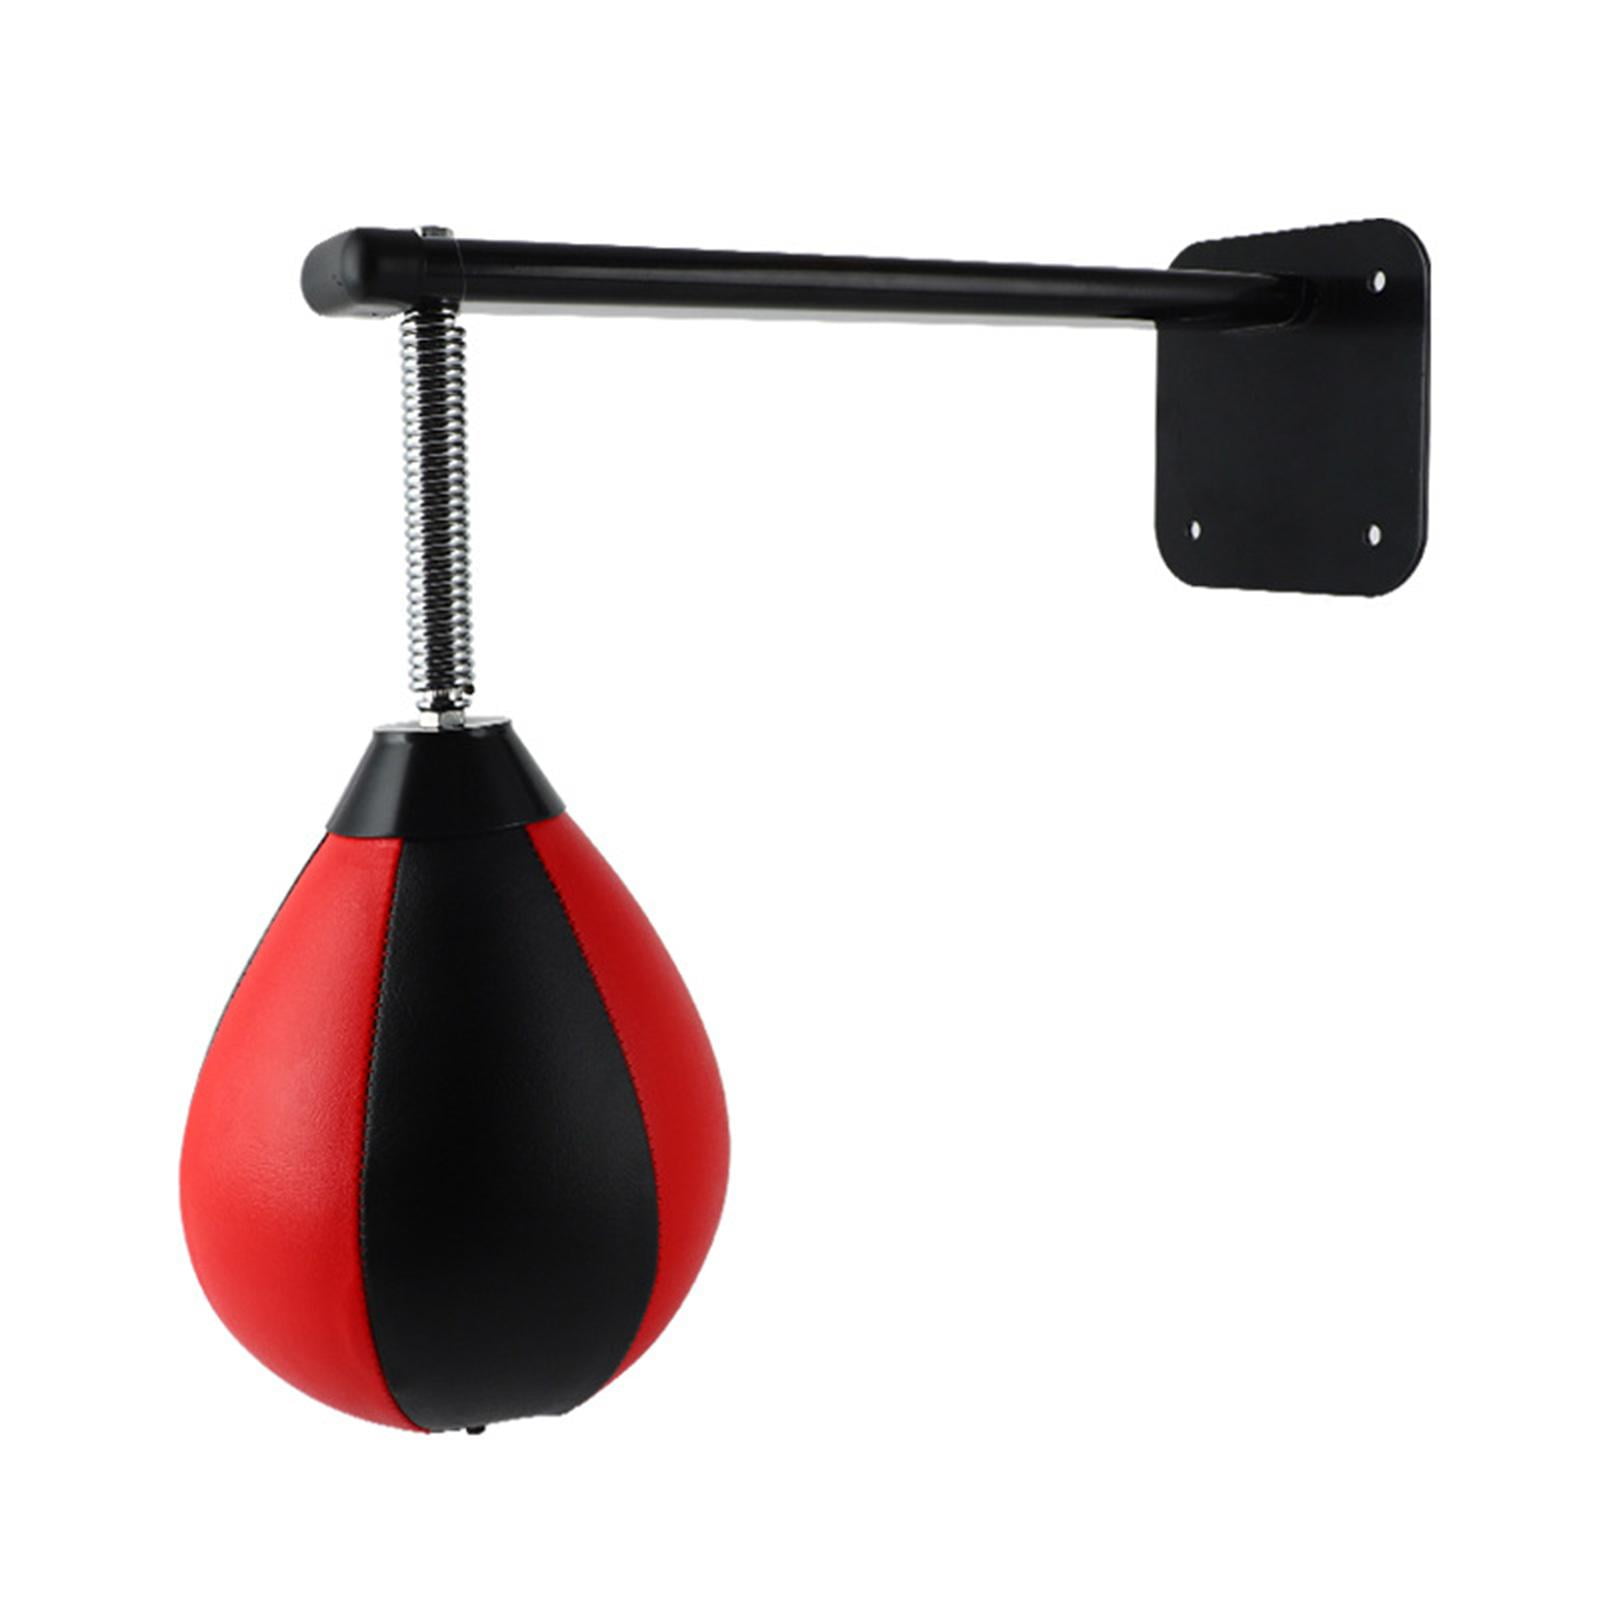 PU Speed Bag Boxing Punching Bag Swivel Speed Ball Exercise Fitness Training Ball Lovt Boxing Speed Ball 1PCS,Black+Red